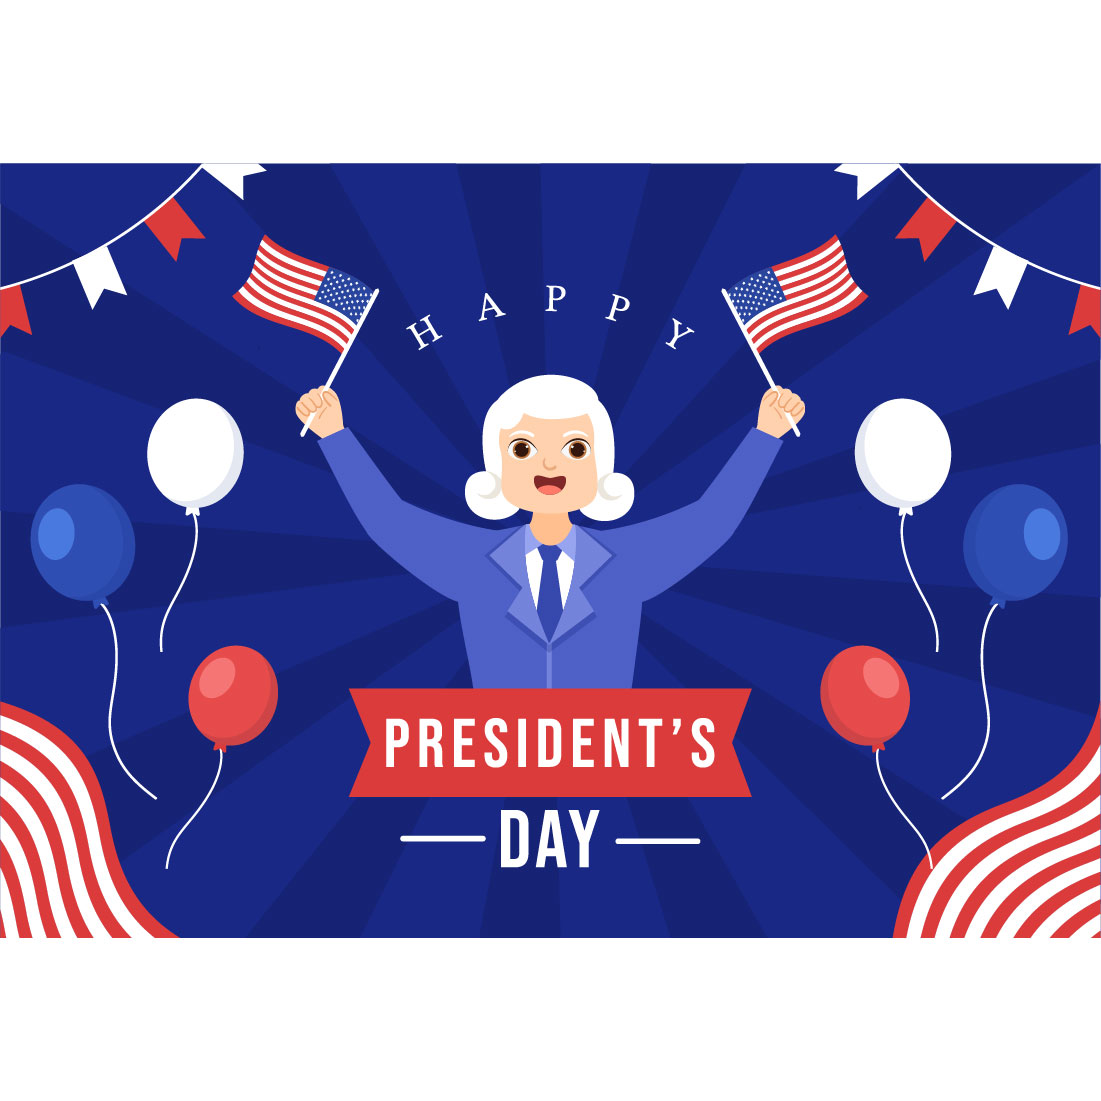 Cartoon Happy Presidents Day Graphics Design cover image.